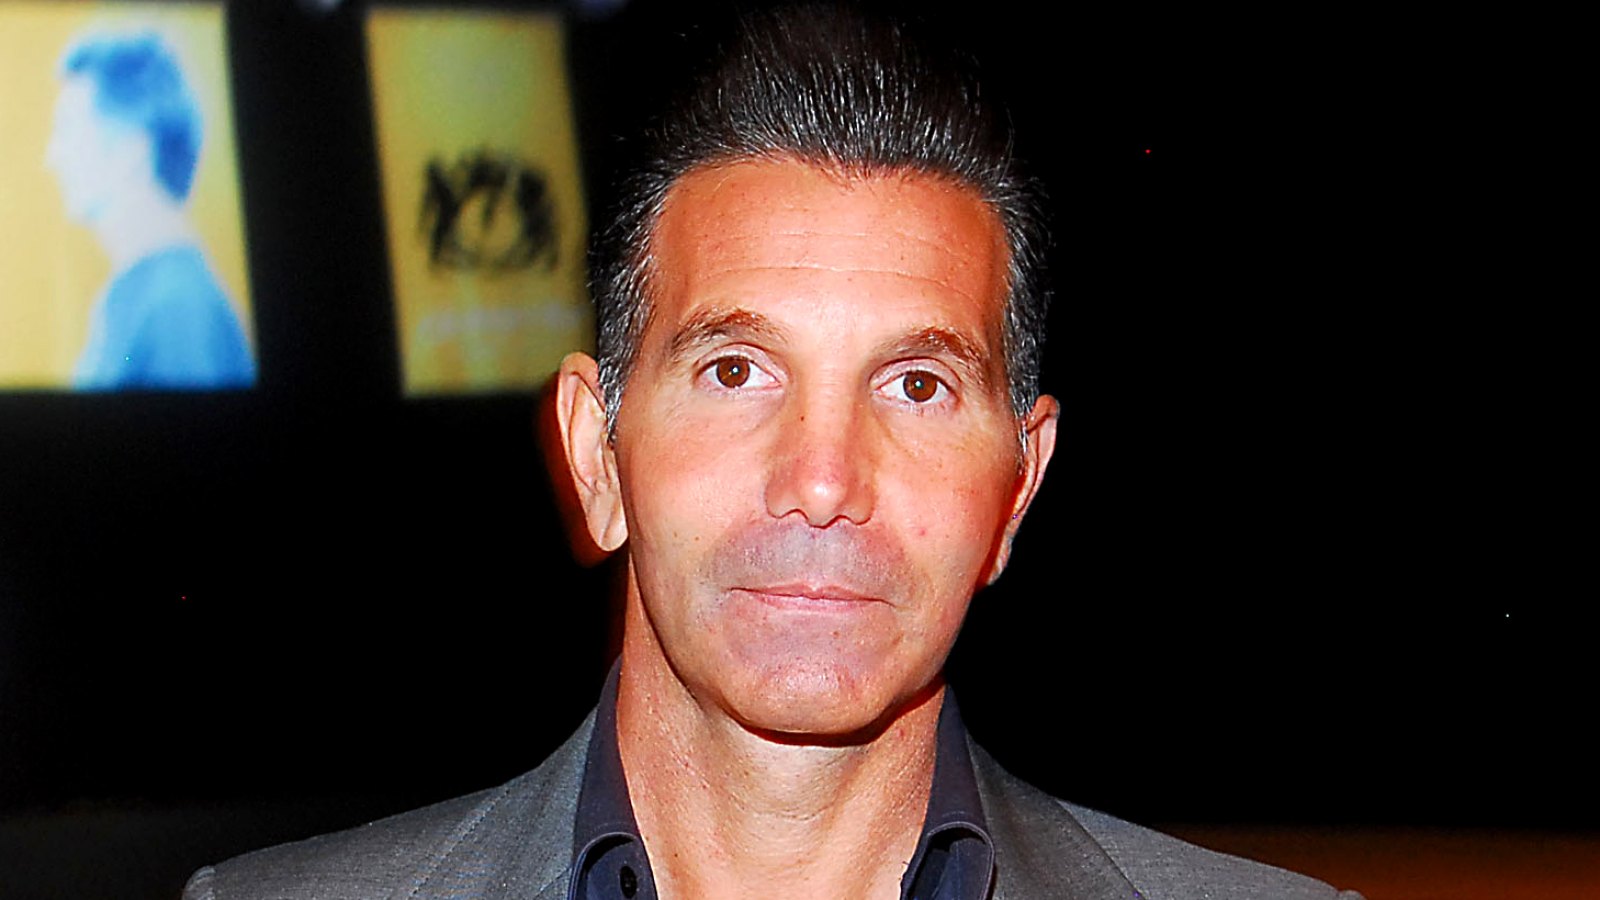 Mossimo Giannulli Released From Prison After College Admissions Scandal